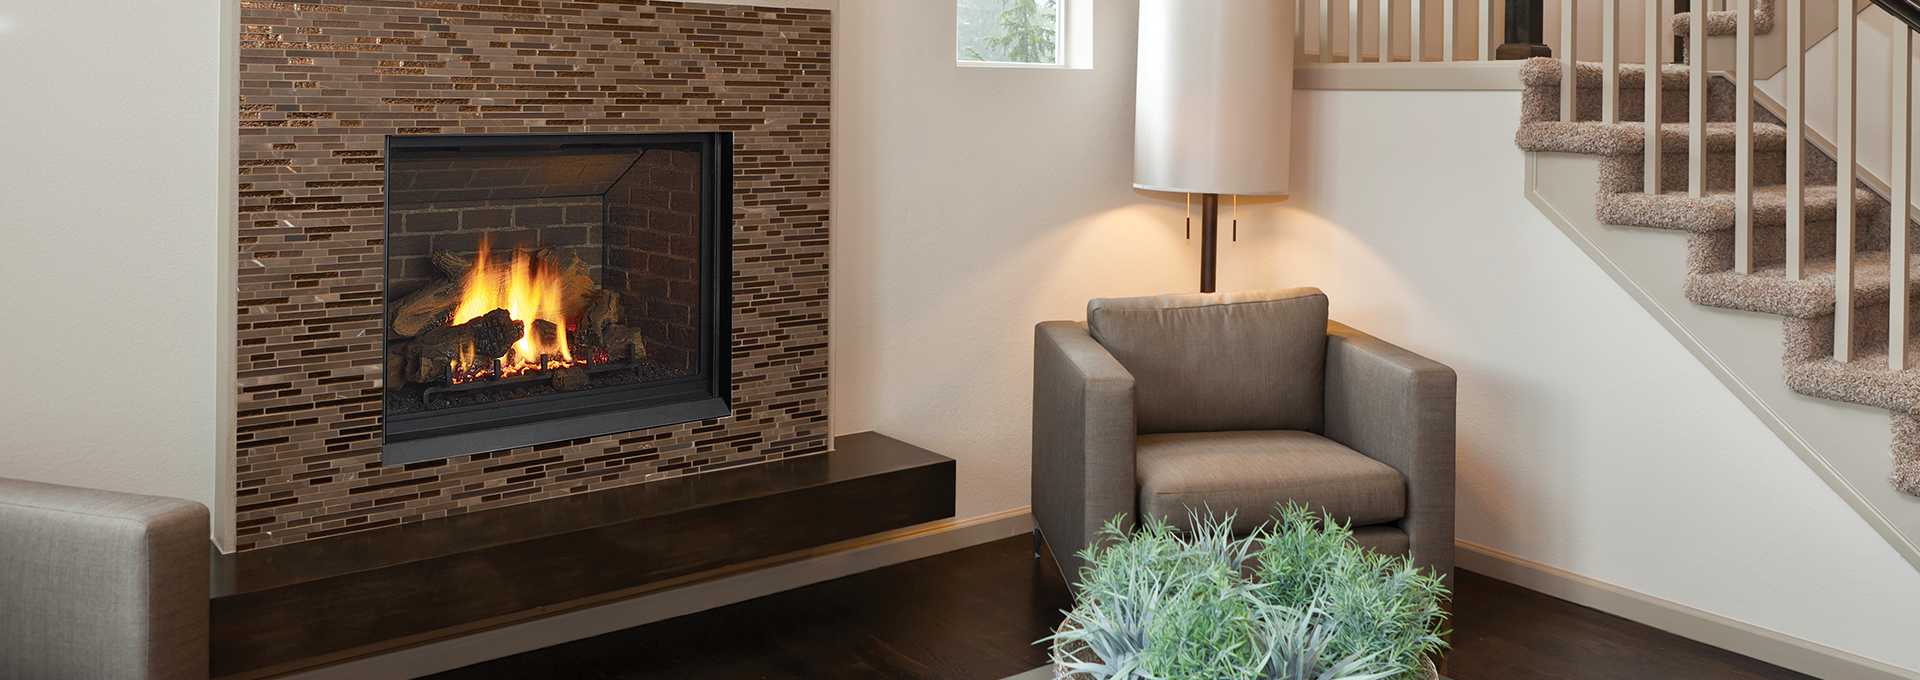 Types of Gas Fireplaces Explained 